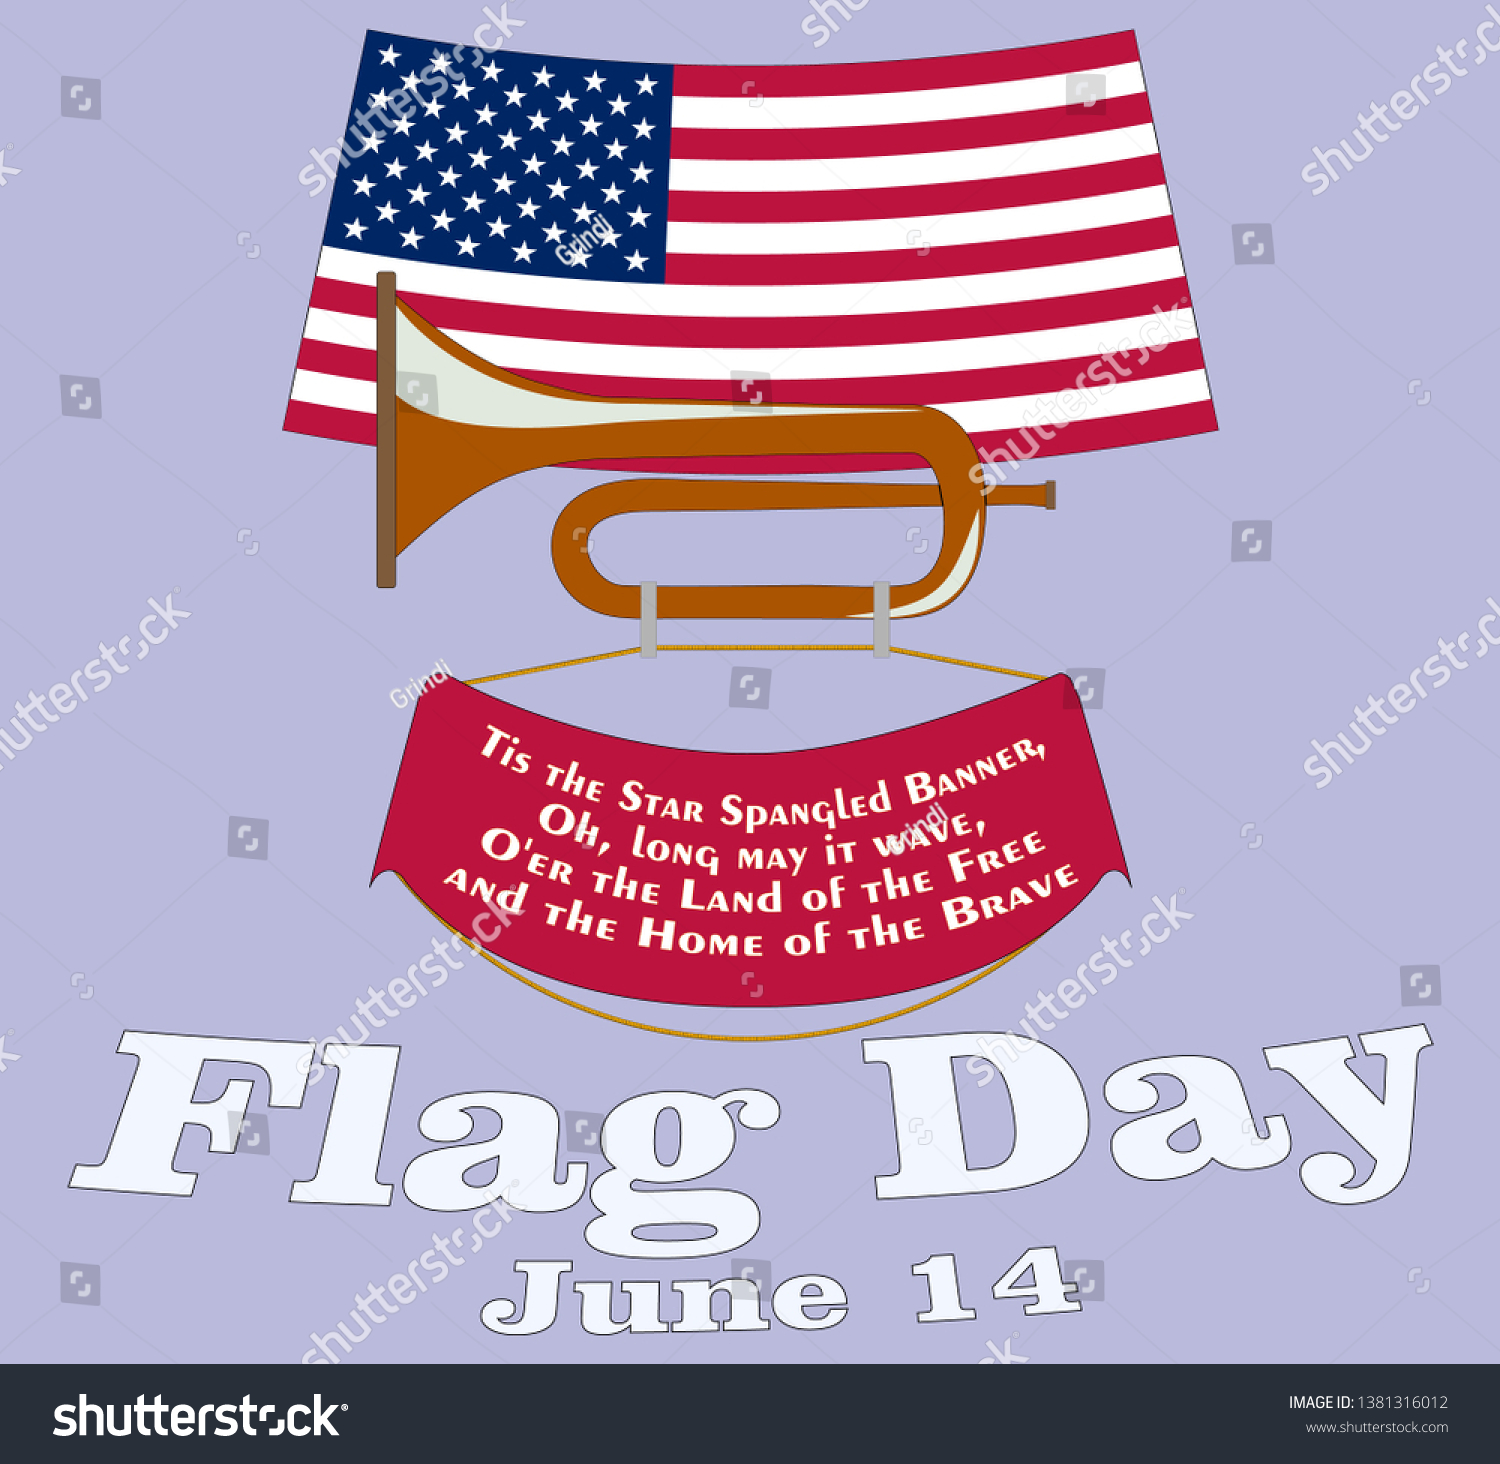 SVG of Flag Day card. Poster for June 14 Birthday of American Stars and Stripes. USA Star-Spangled Banner above vintage cavalry horn with standard and national anthem quotes. Land of Free and Home of Brave svg